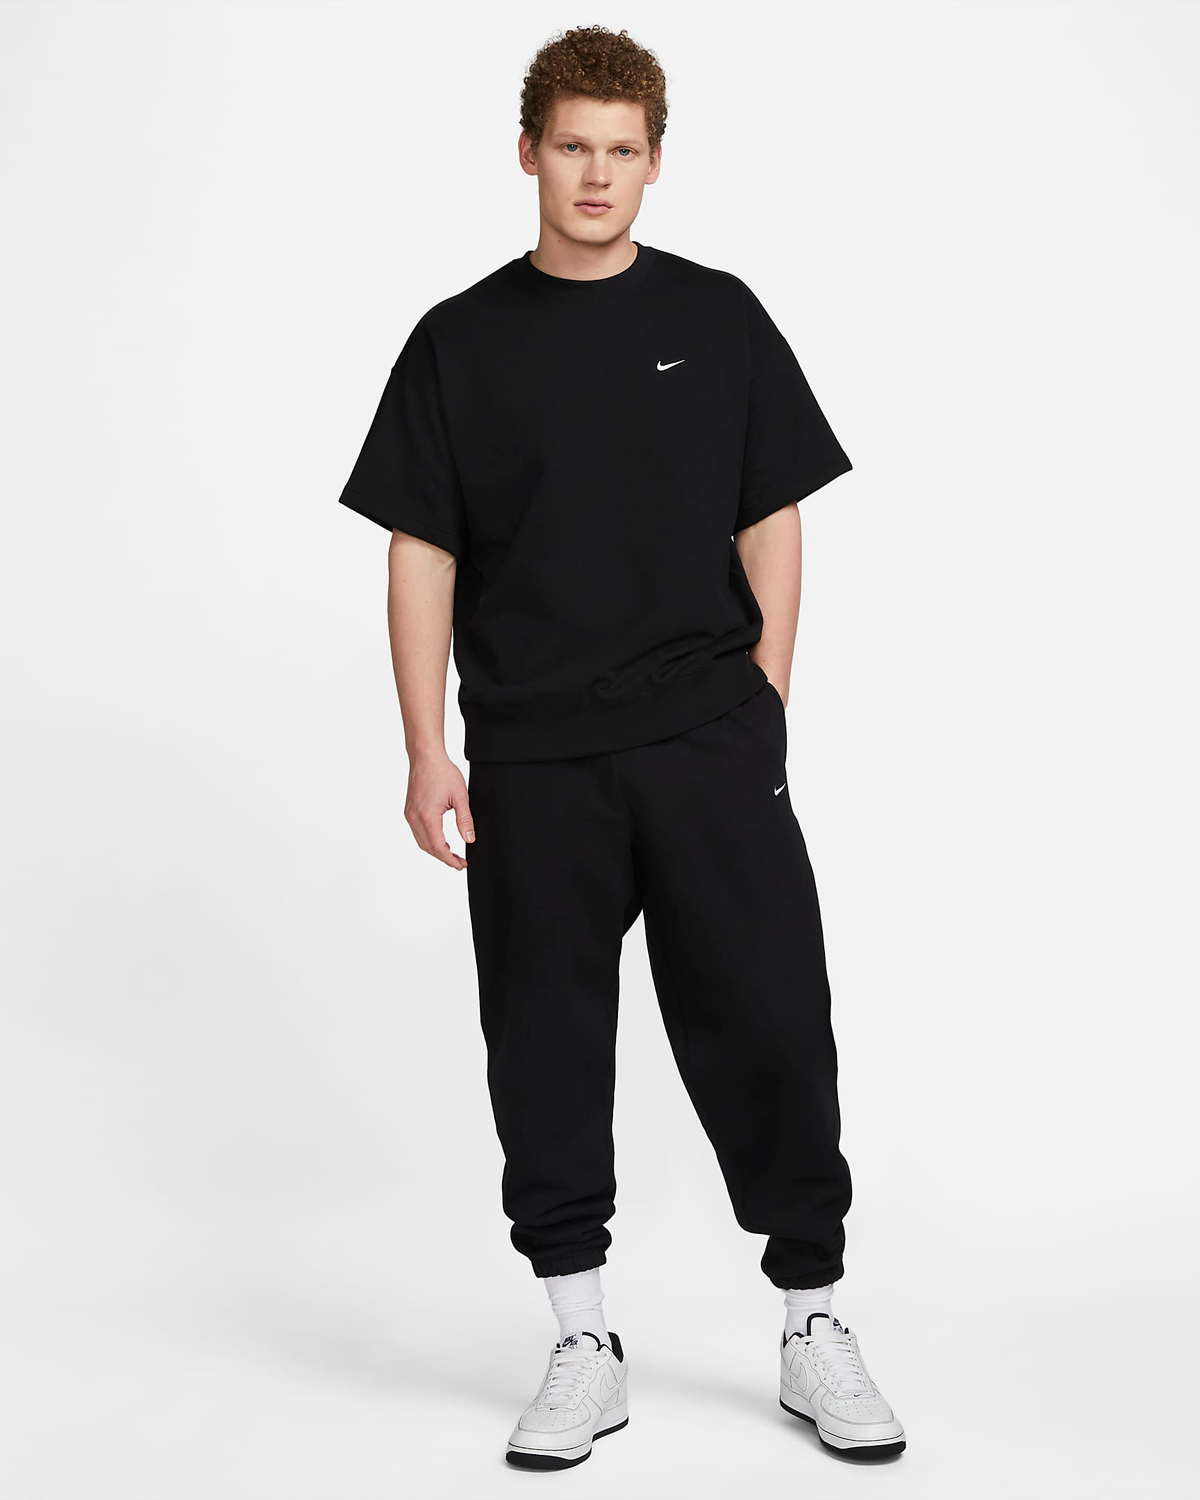 Nike-Solo-Swoosh-T-Shirt-Black-White-Outfit